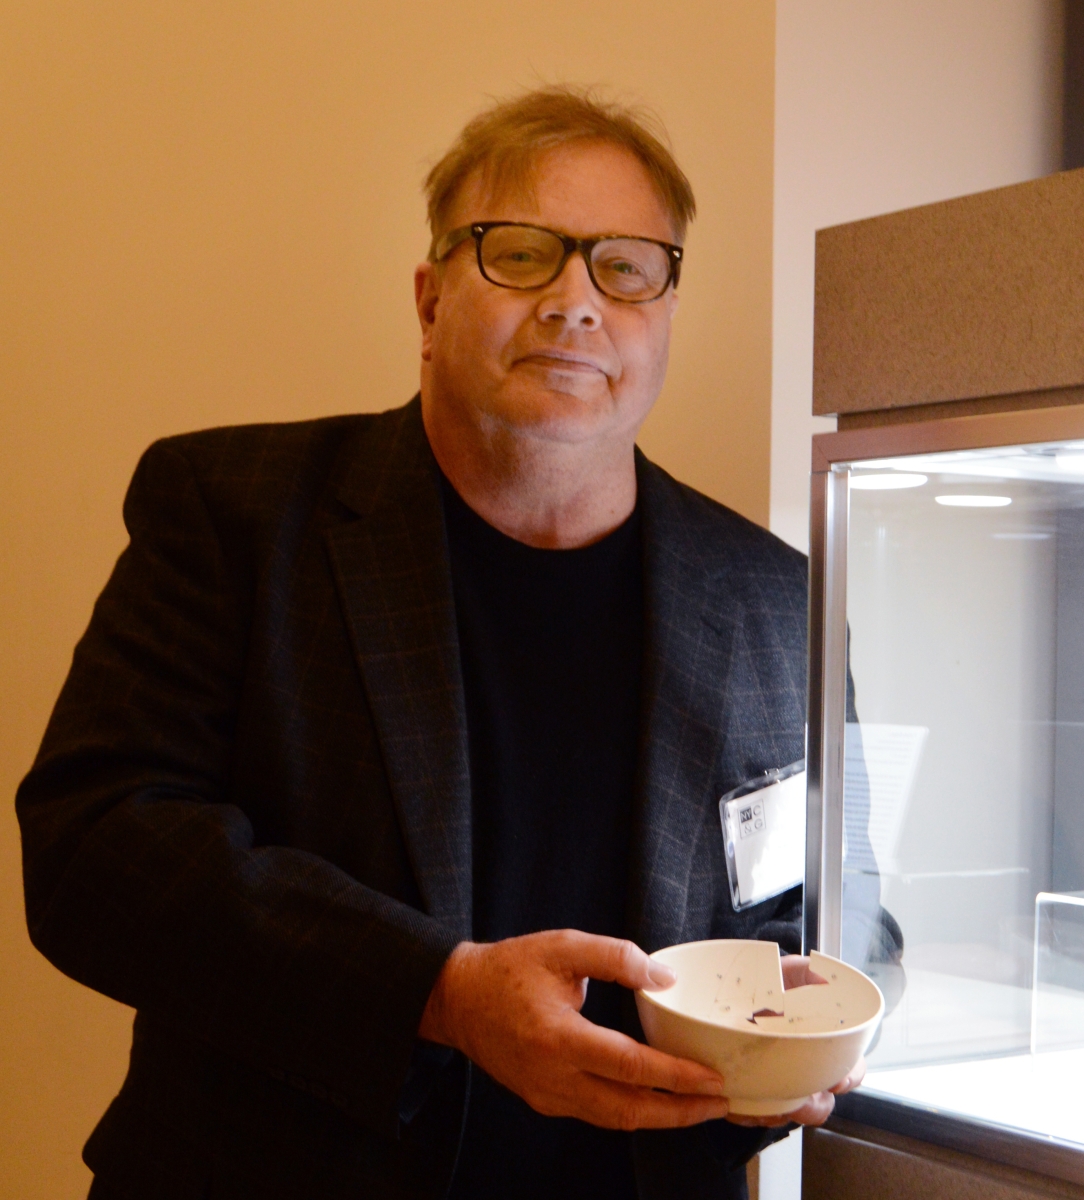 Rob Hunter, editor of the Chipstone Foundation’s annual publication Ceramics in America, displays the Eighteenth Century punch bowl that was excavated in 2014 on the site where the new Museum of the American Revolution was being built. First thought to be stoneware, the bowl was later determined to be hard-paste porcelain, likely made in Philadelphia. The bowl made its public debut here at the show and will return to the museum, which is opening April 19.